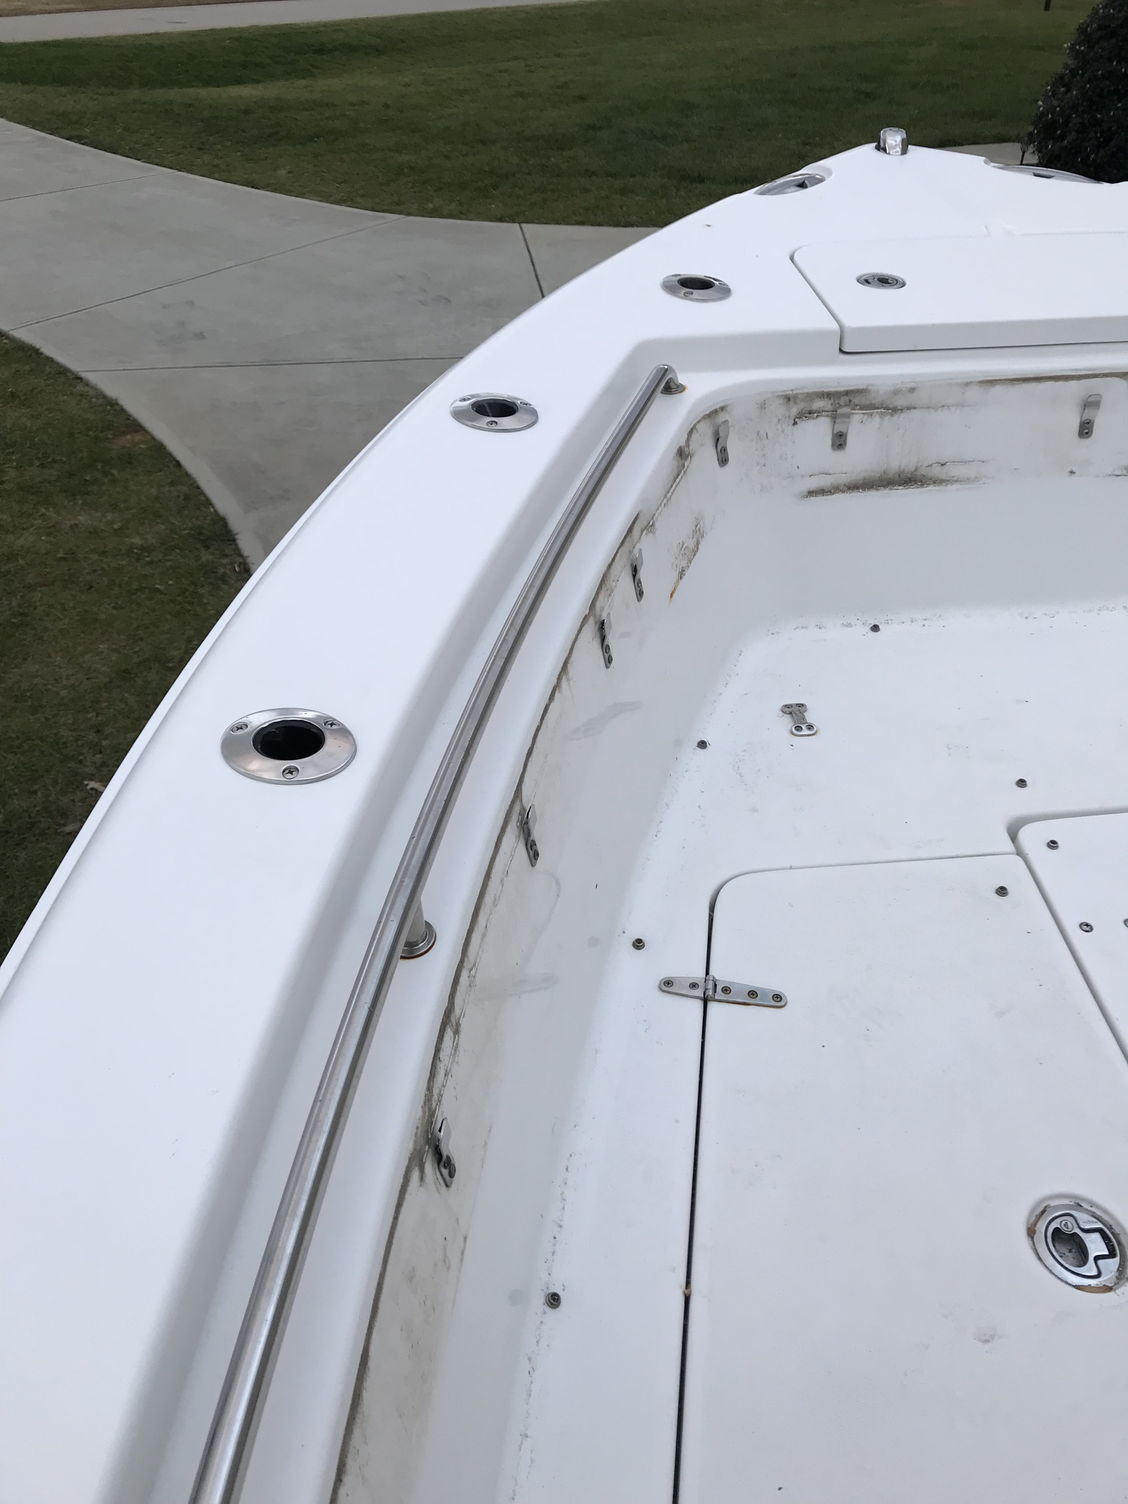 sea hunt transom rod rack photo - The Hull Truth - Boating and